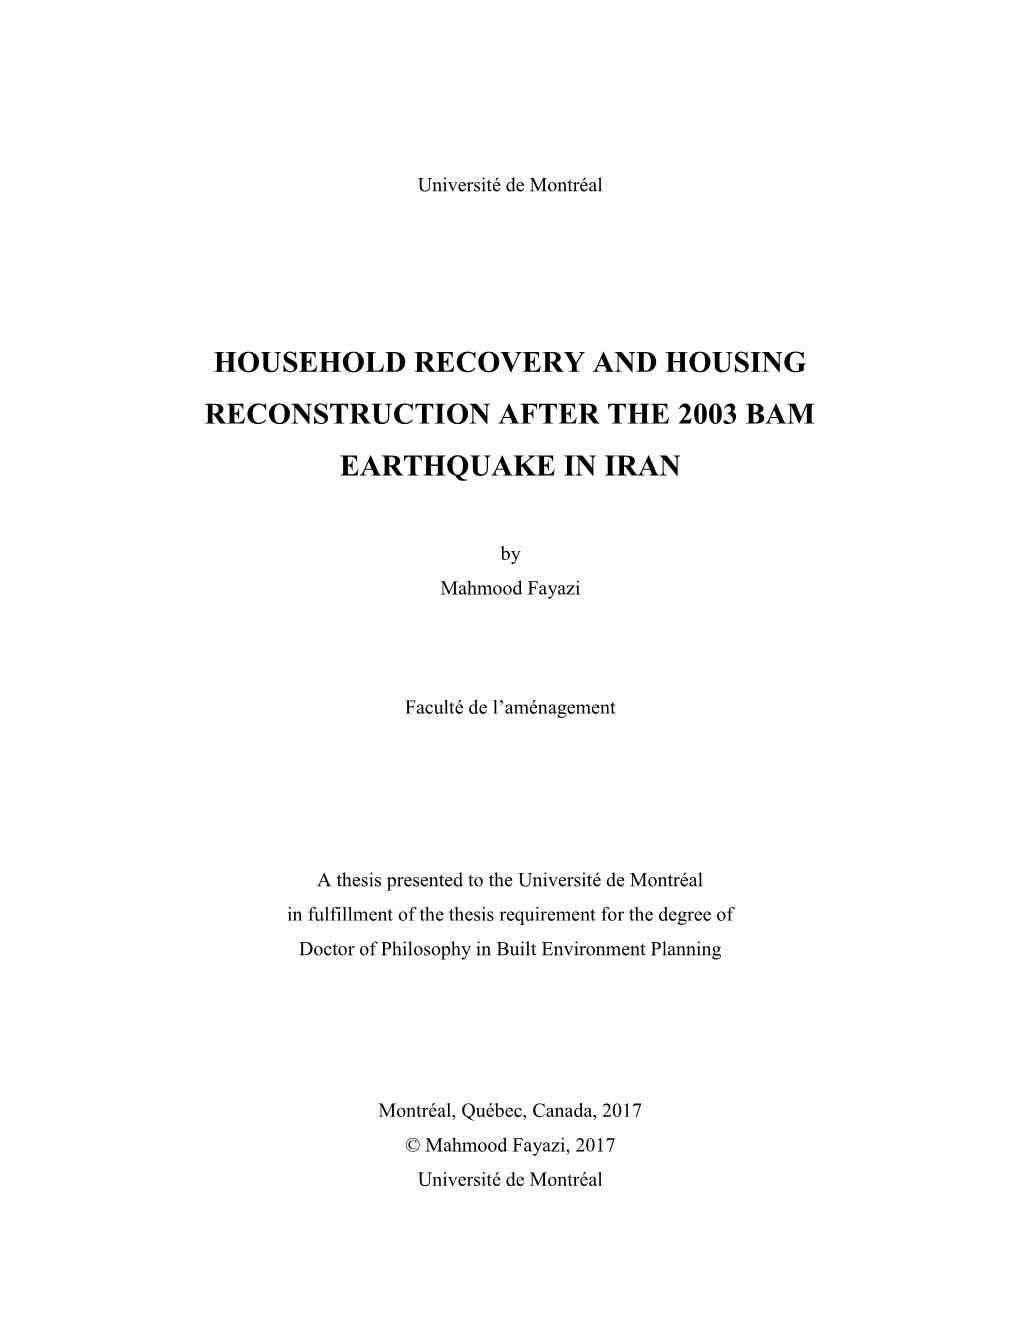 Household Recovery and Housing Reconstruction After the 2003 Bam Earthquake in Iran